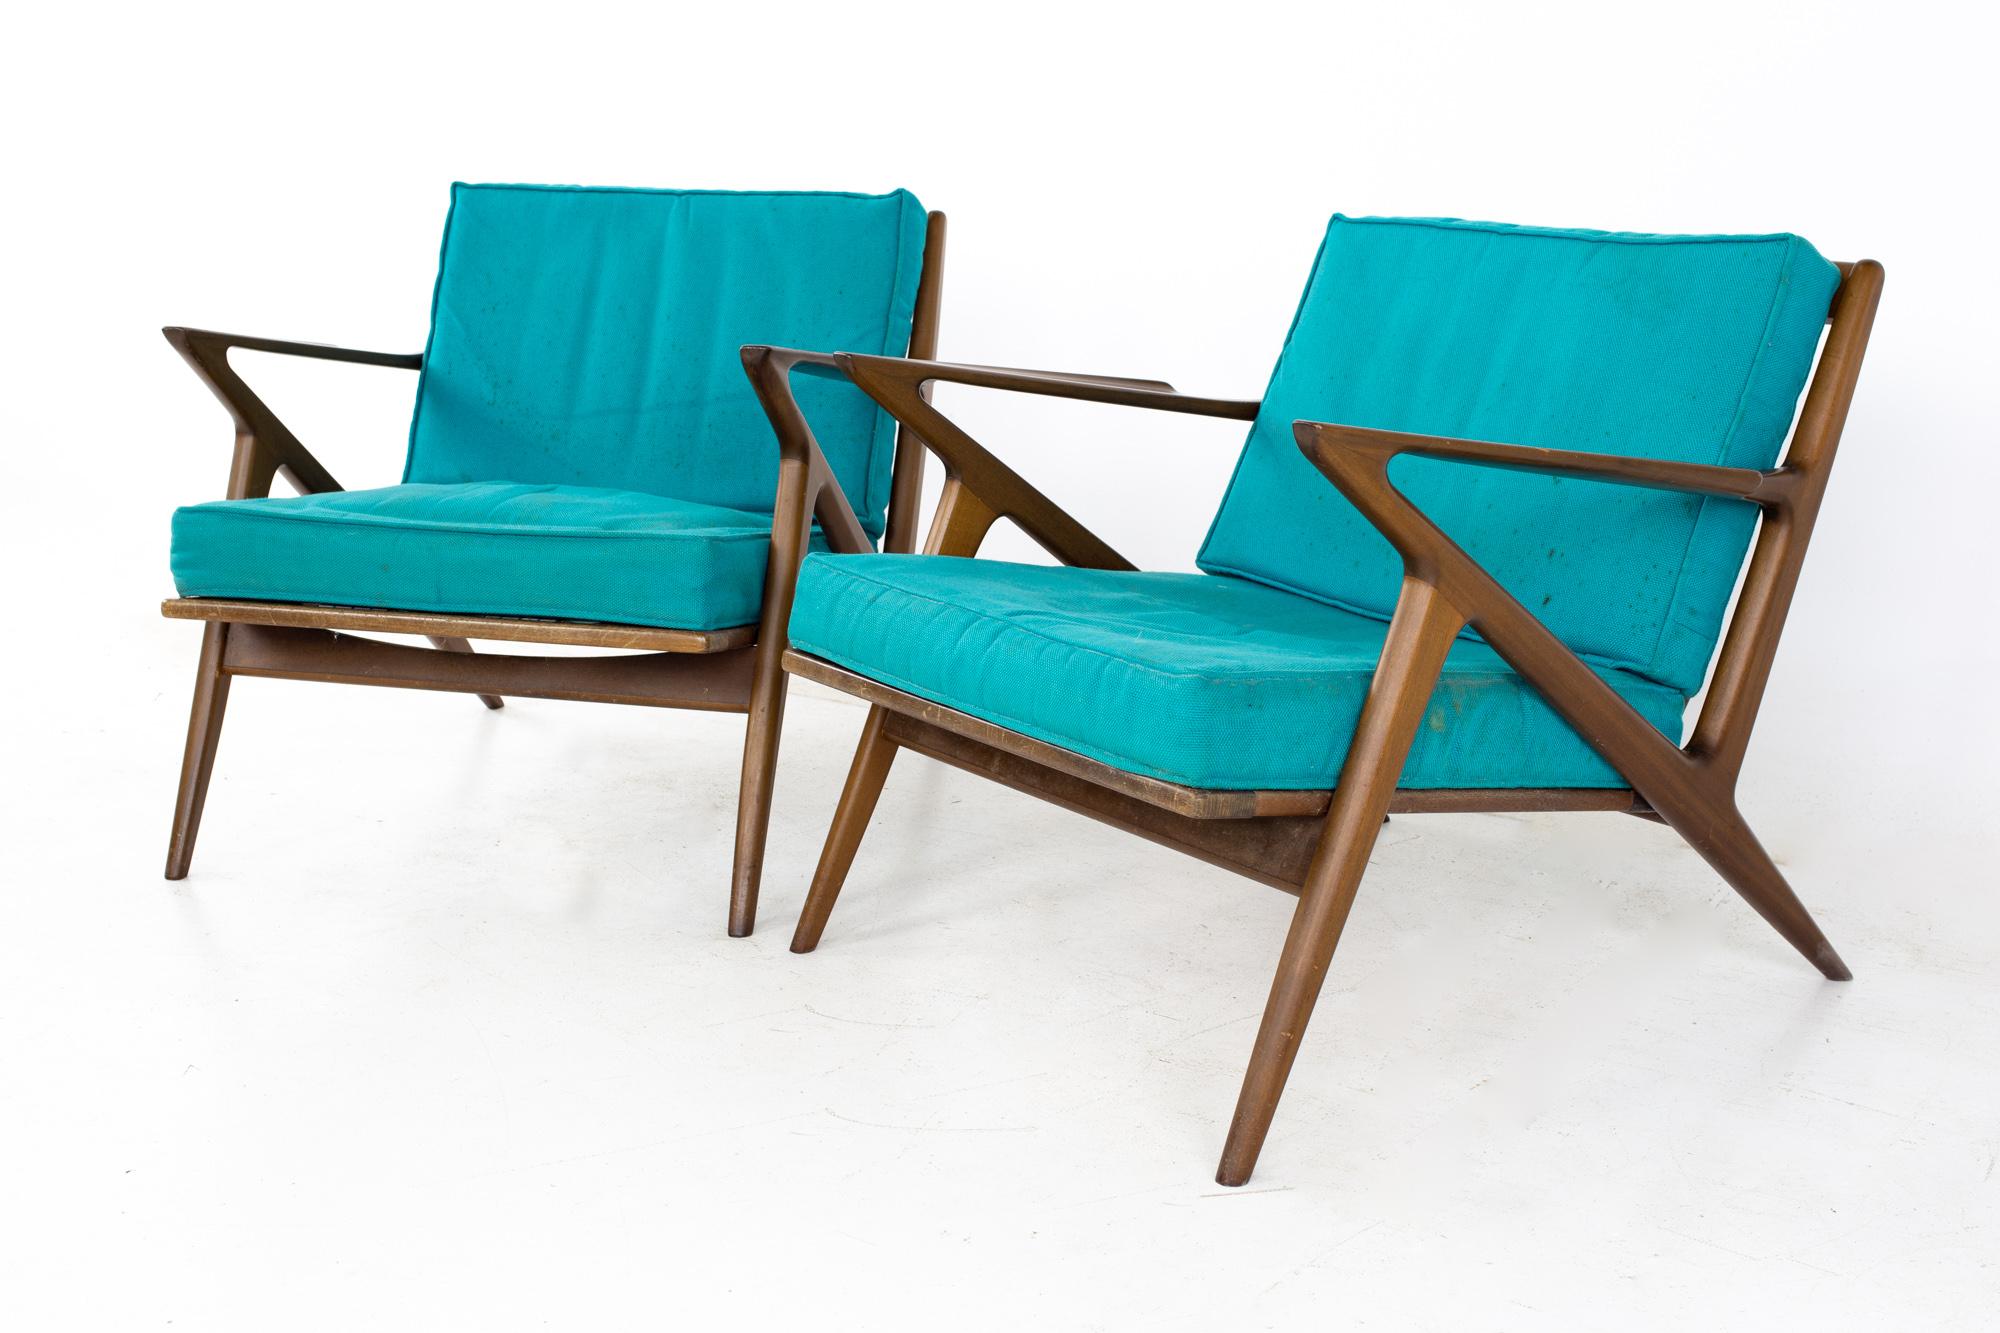 Poul Jensen for Selig Mid Century Z lounge chairs, a pair
Each chair measures: 29.5 wide x 27 deep x 26.5 high, with a seat height of 15.25 inches and arm height of 22.5 inches 

All pieces of furniture can be had in what we call restored vintage